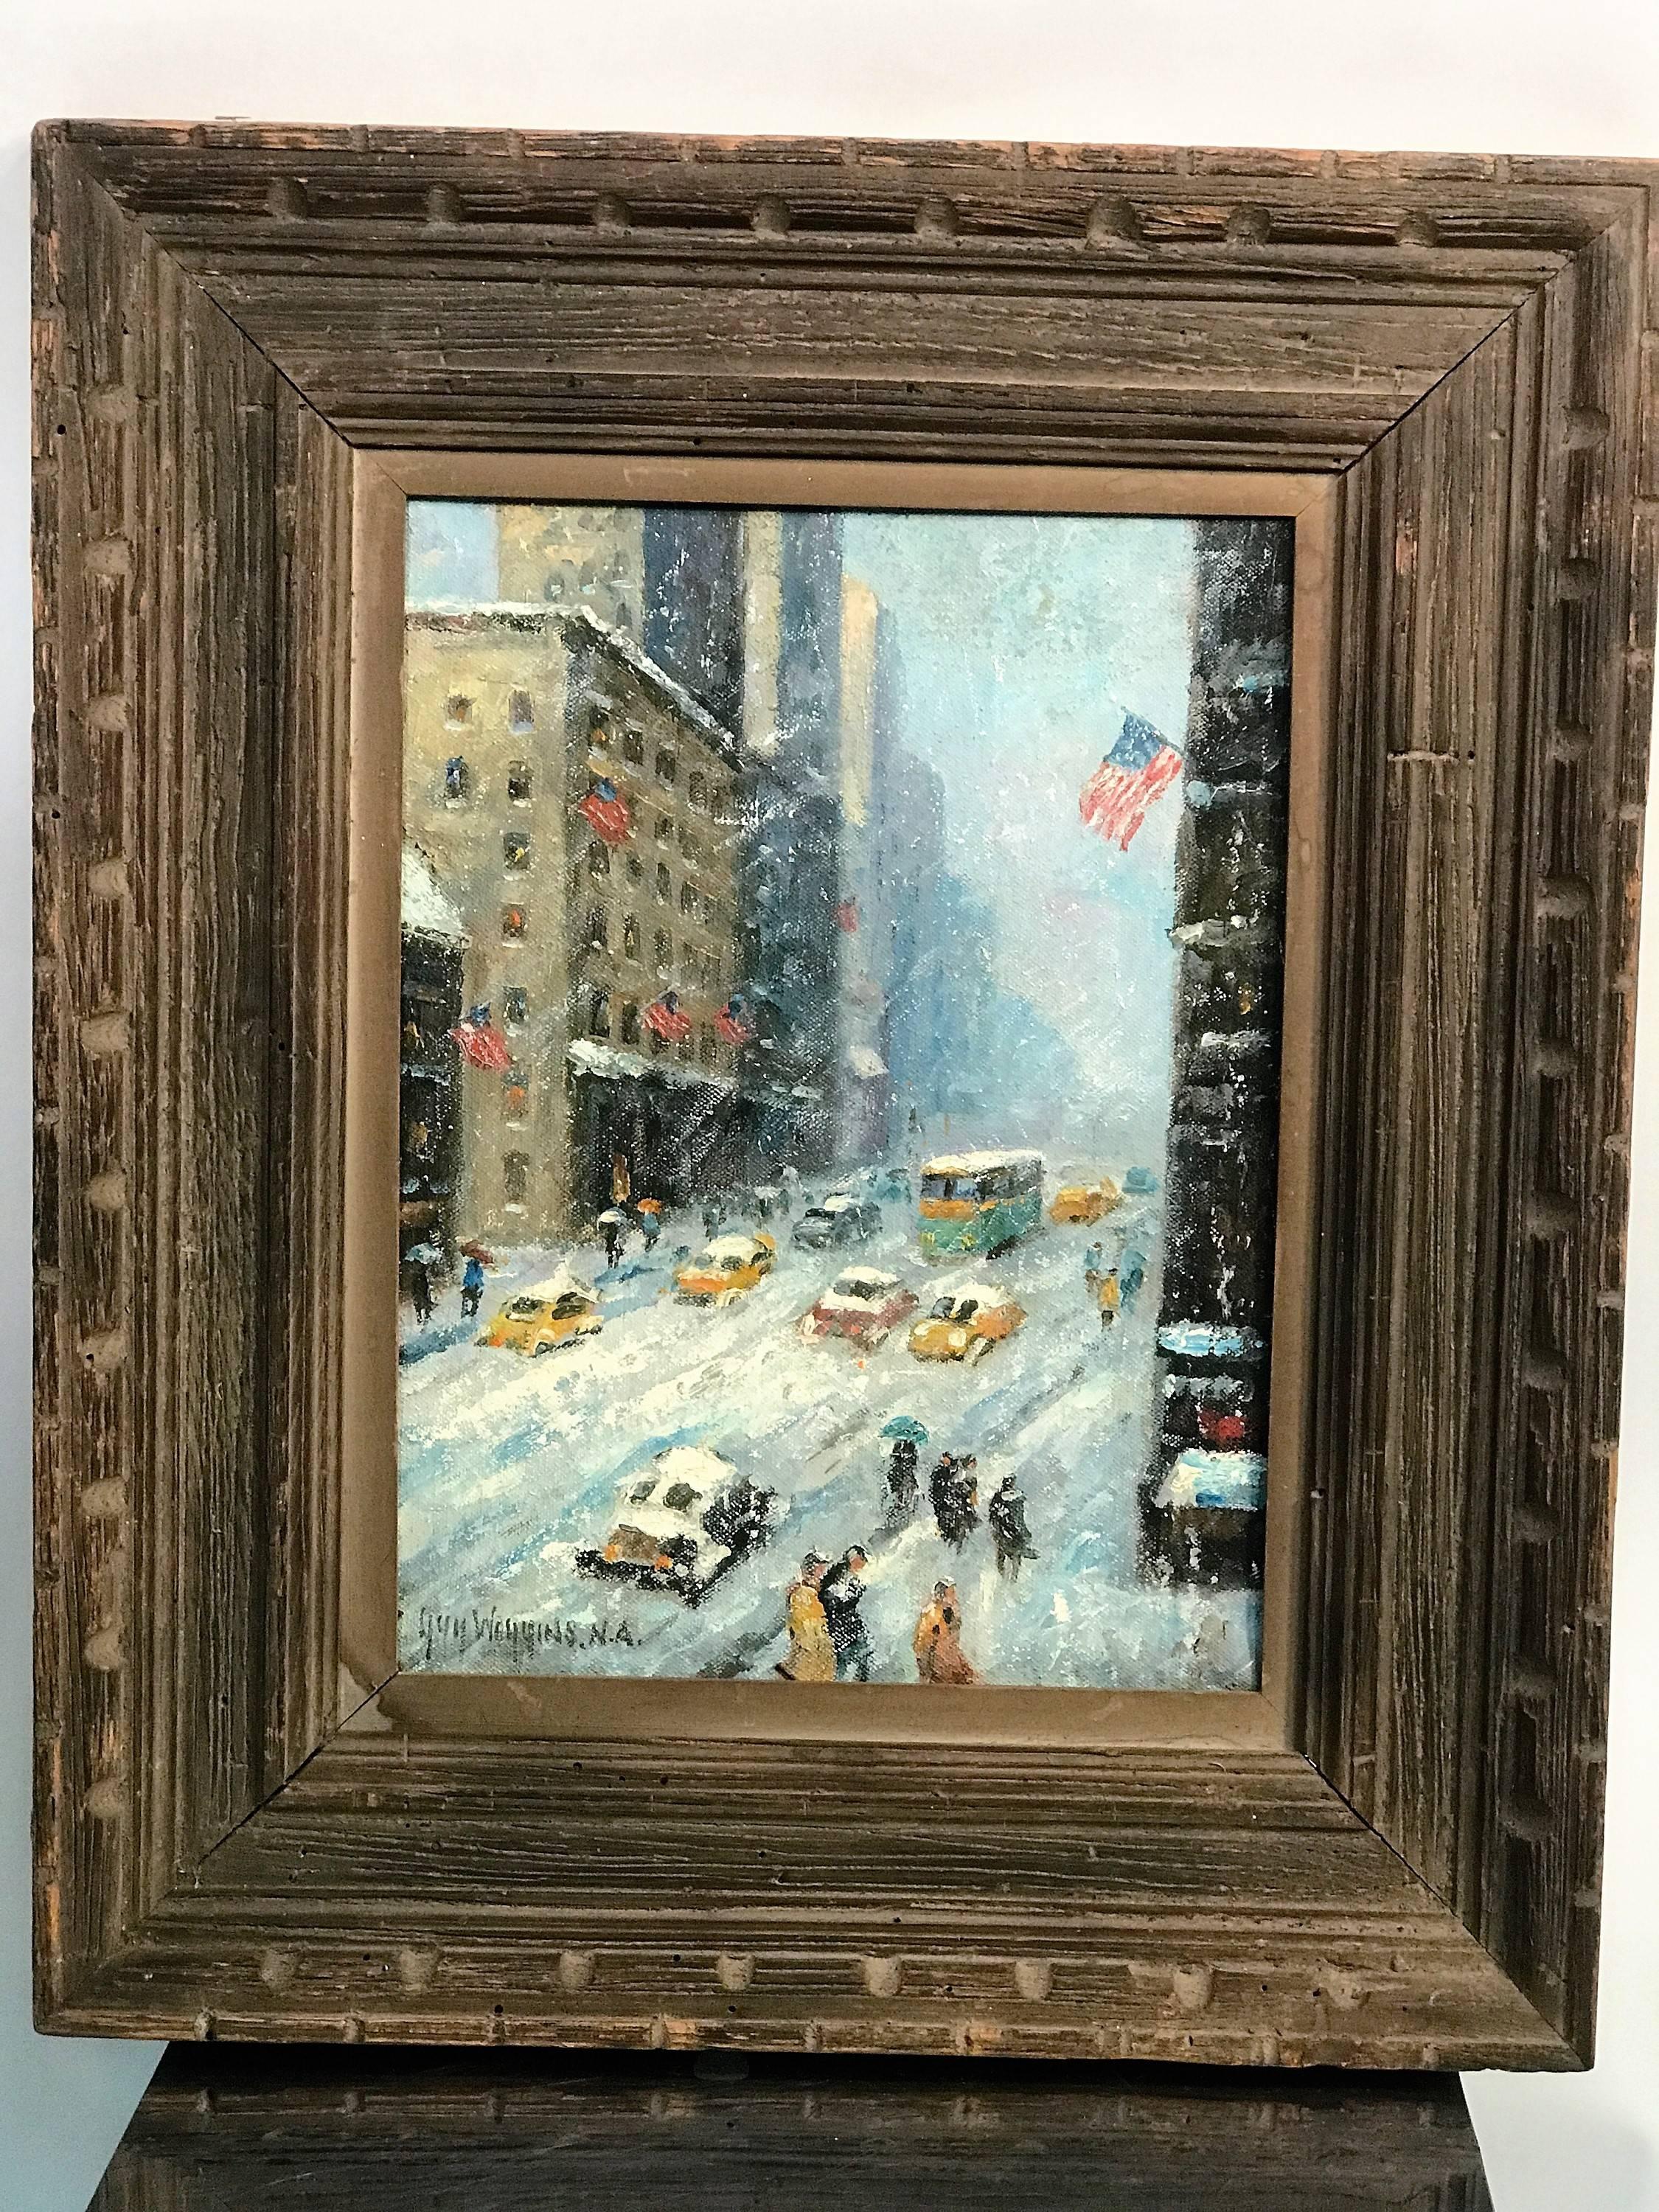 Great oil on canvas 20th century copy of famous guy Wiggins painting of Iconic NYC Street Snow Storm. Framed in a beautiful 1940s frame made by the 'House of Heydenvk'. Wonderful painting in tribute to masterful American painter Guy Wiggins.